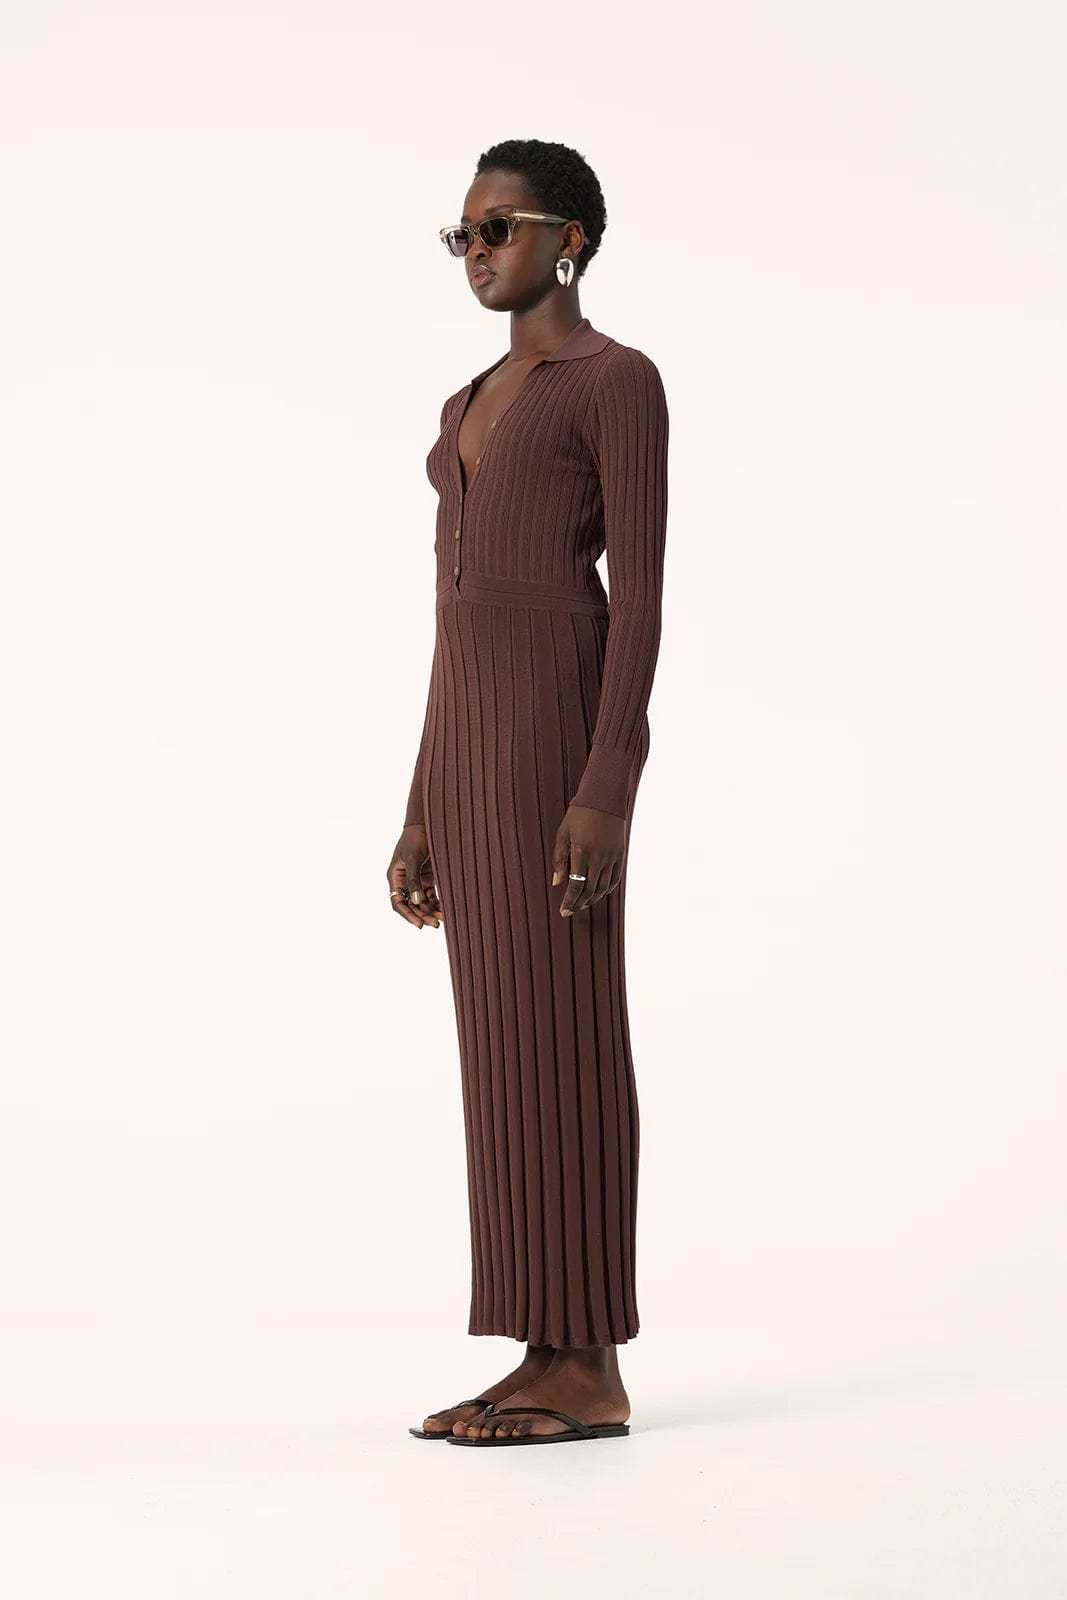 Elka Collective Dresses Elka Collective | Almo Knit Dress - Chocolate